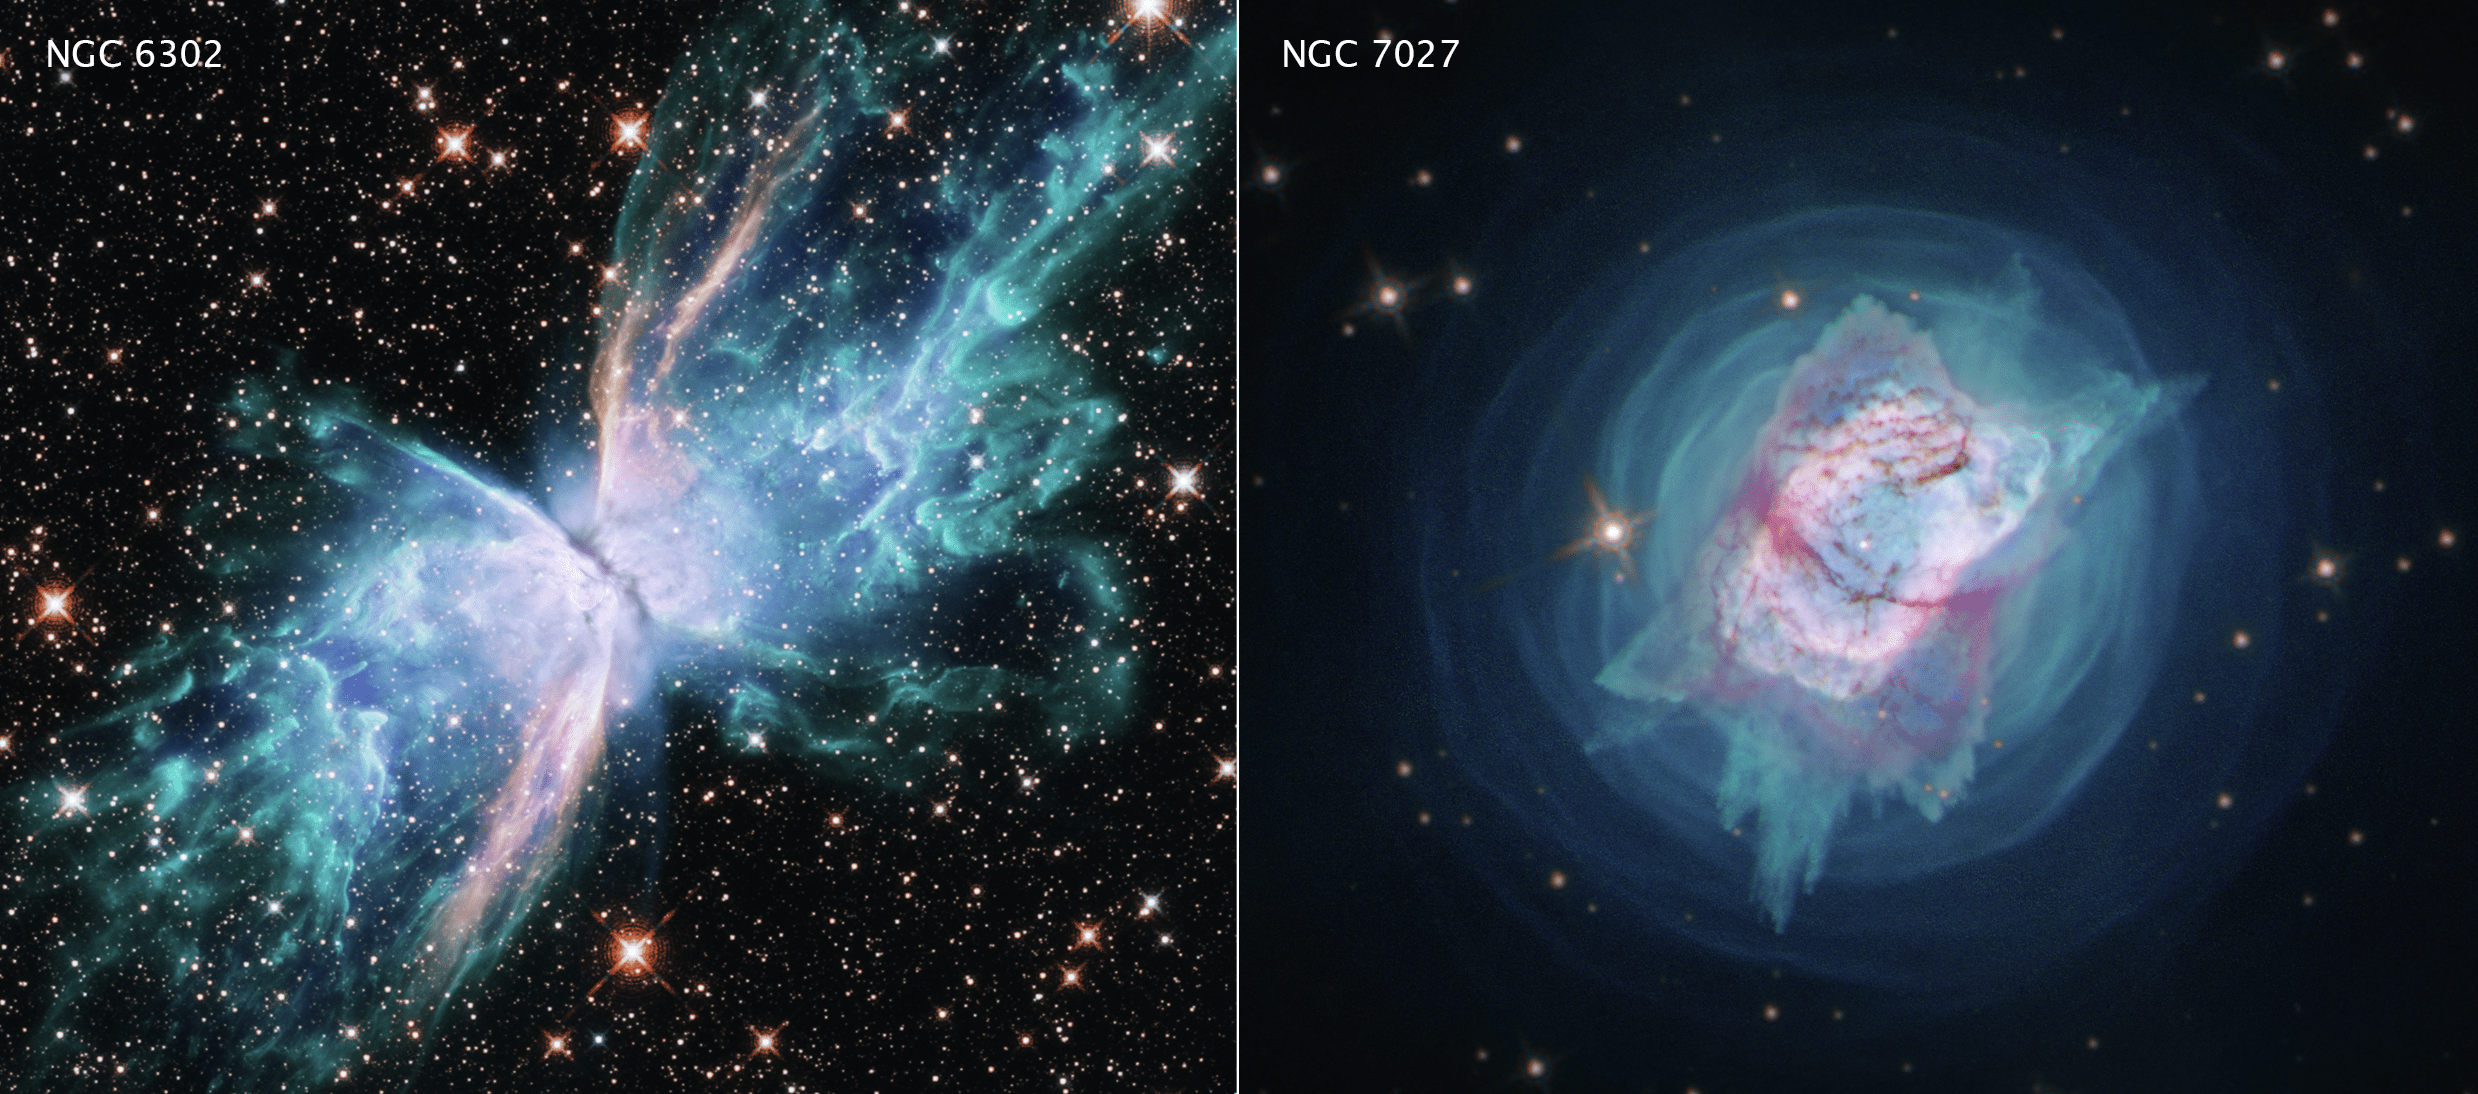 Combined image of butterfly nebula (left) and ngc 7027 (right) as seen by hubble